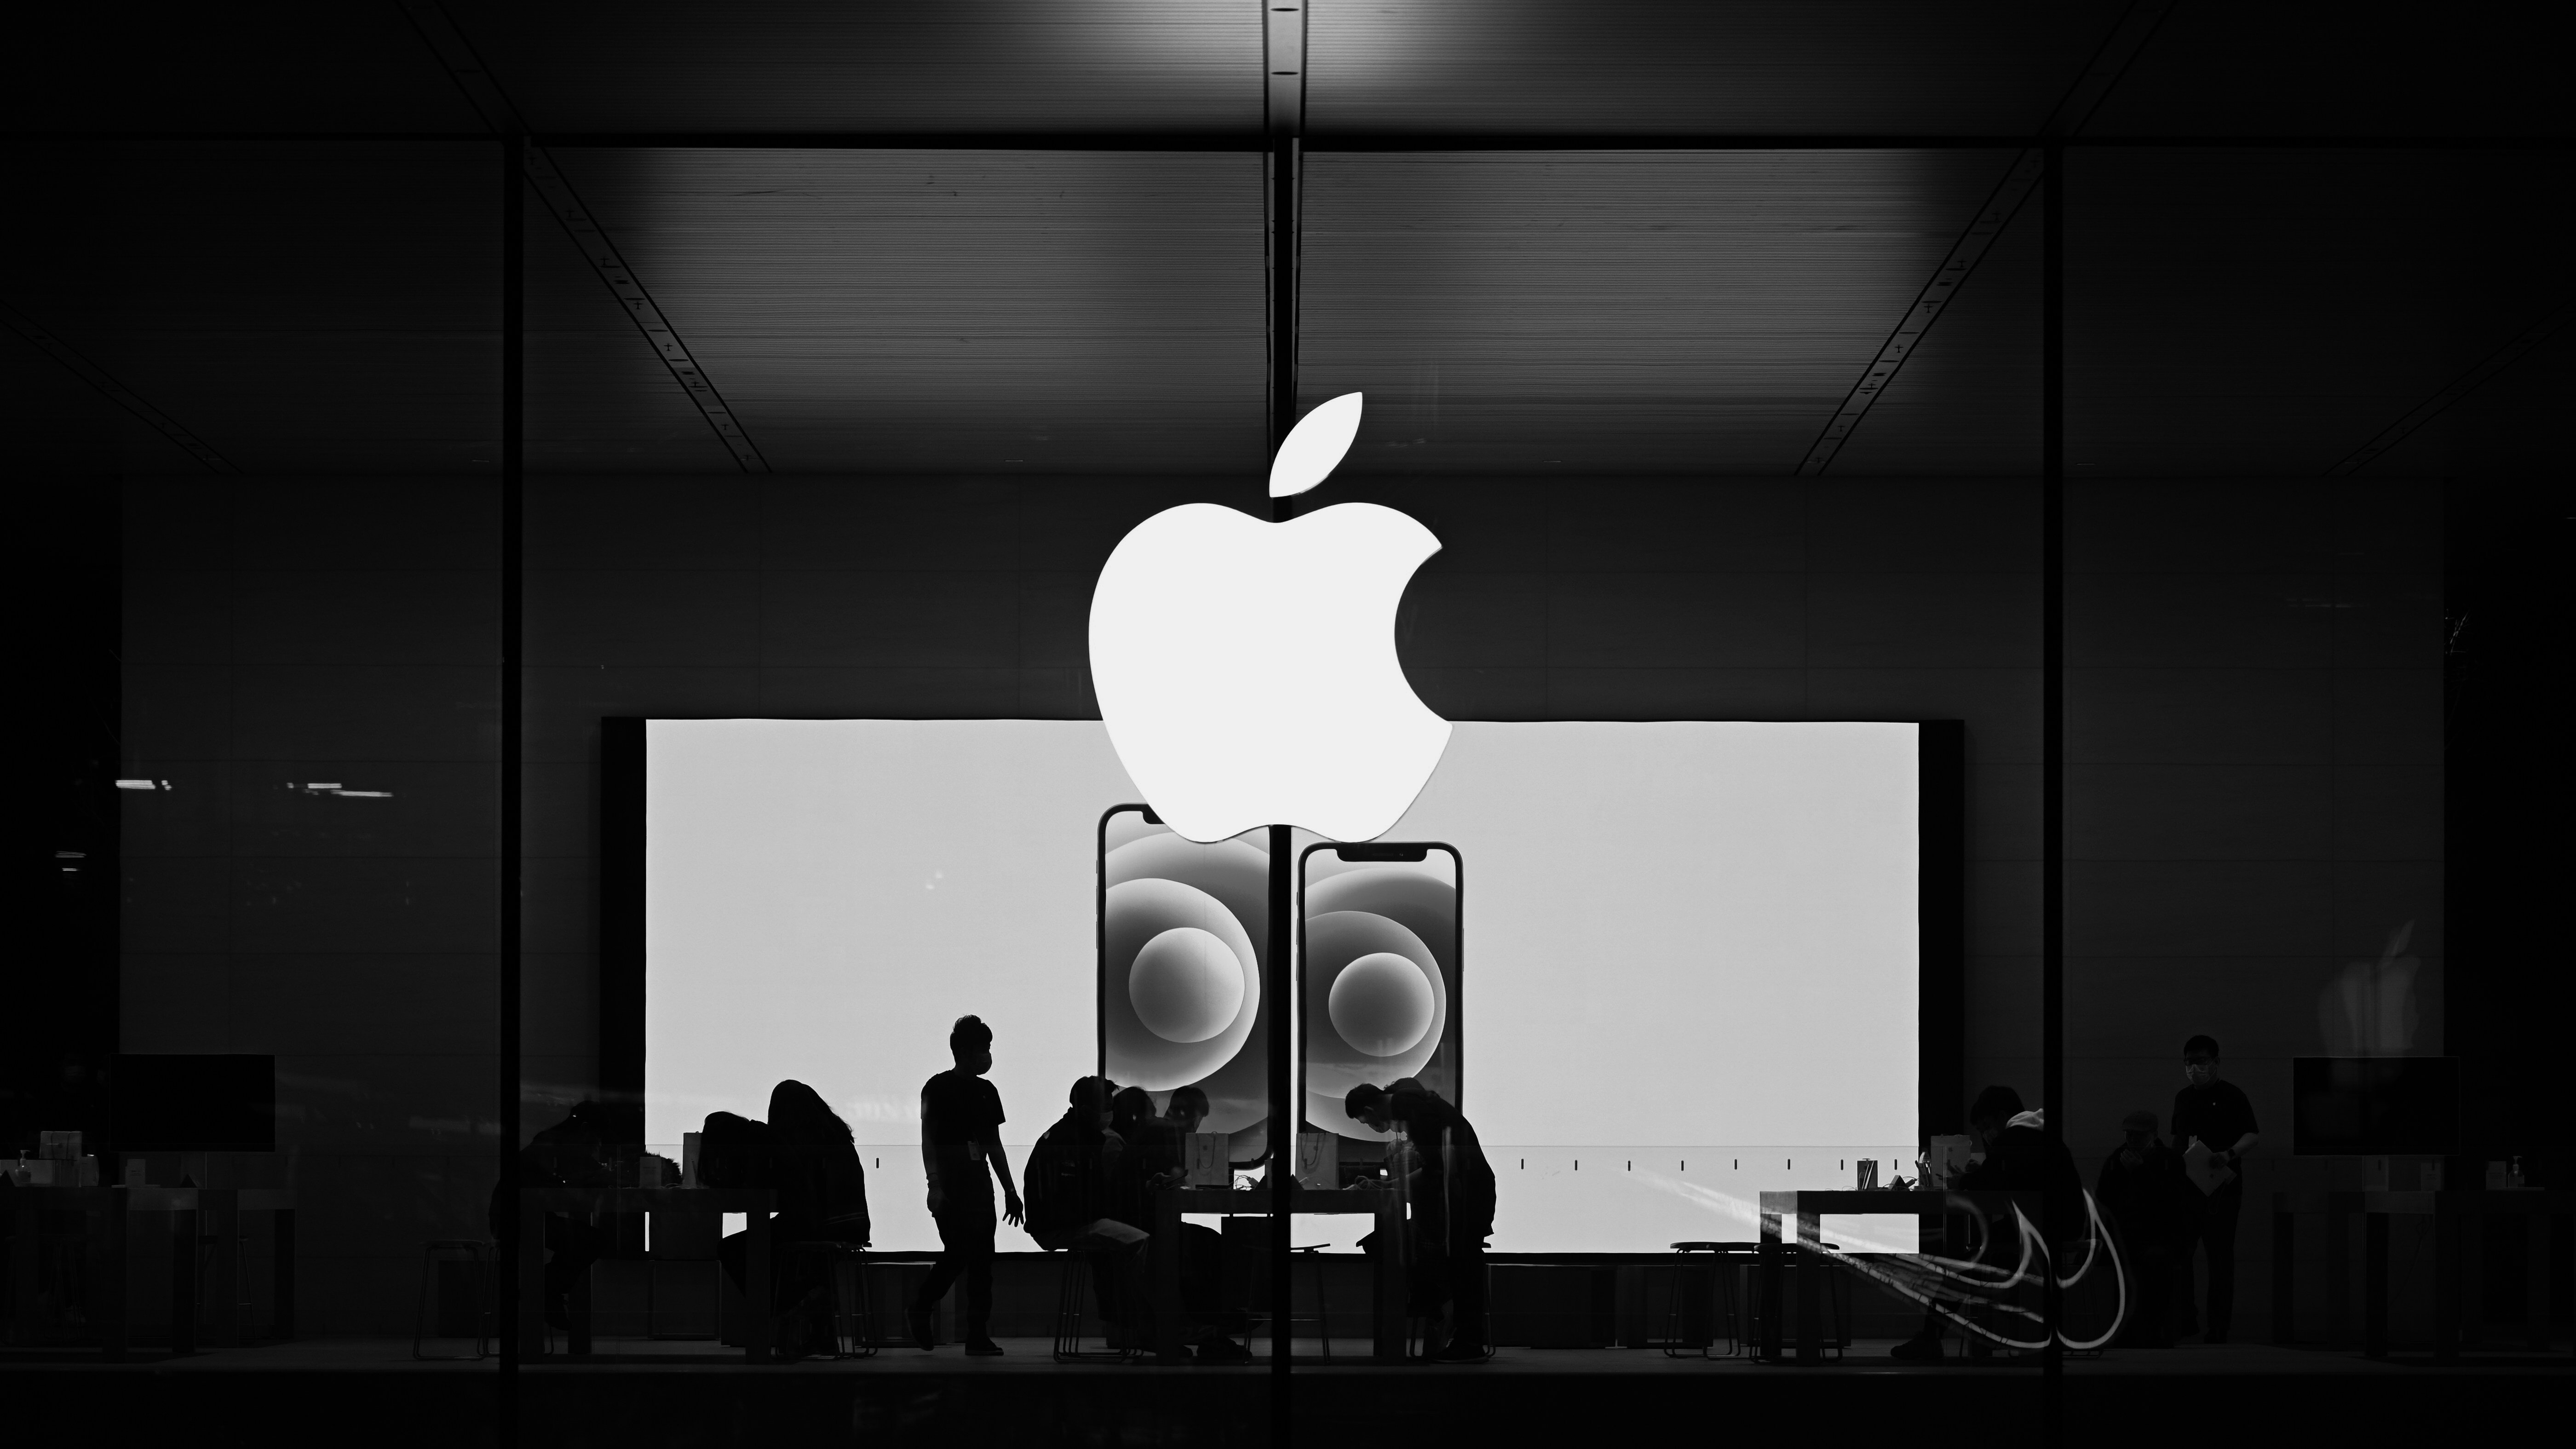 Black and white image of an Apple Store. The sleek minimal design runs throughout the brands products and storefronts adding to its brand equity. 